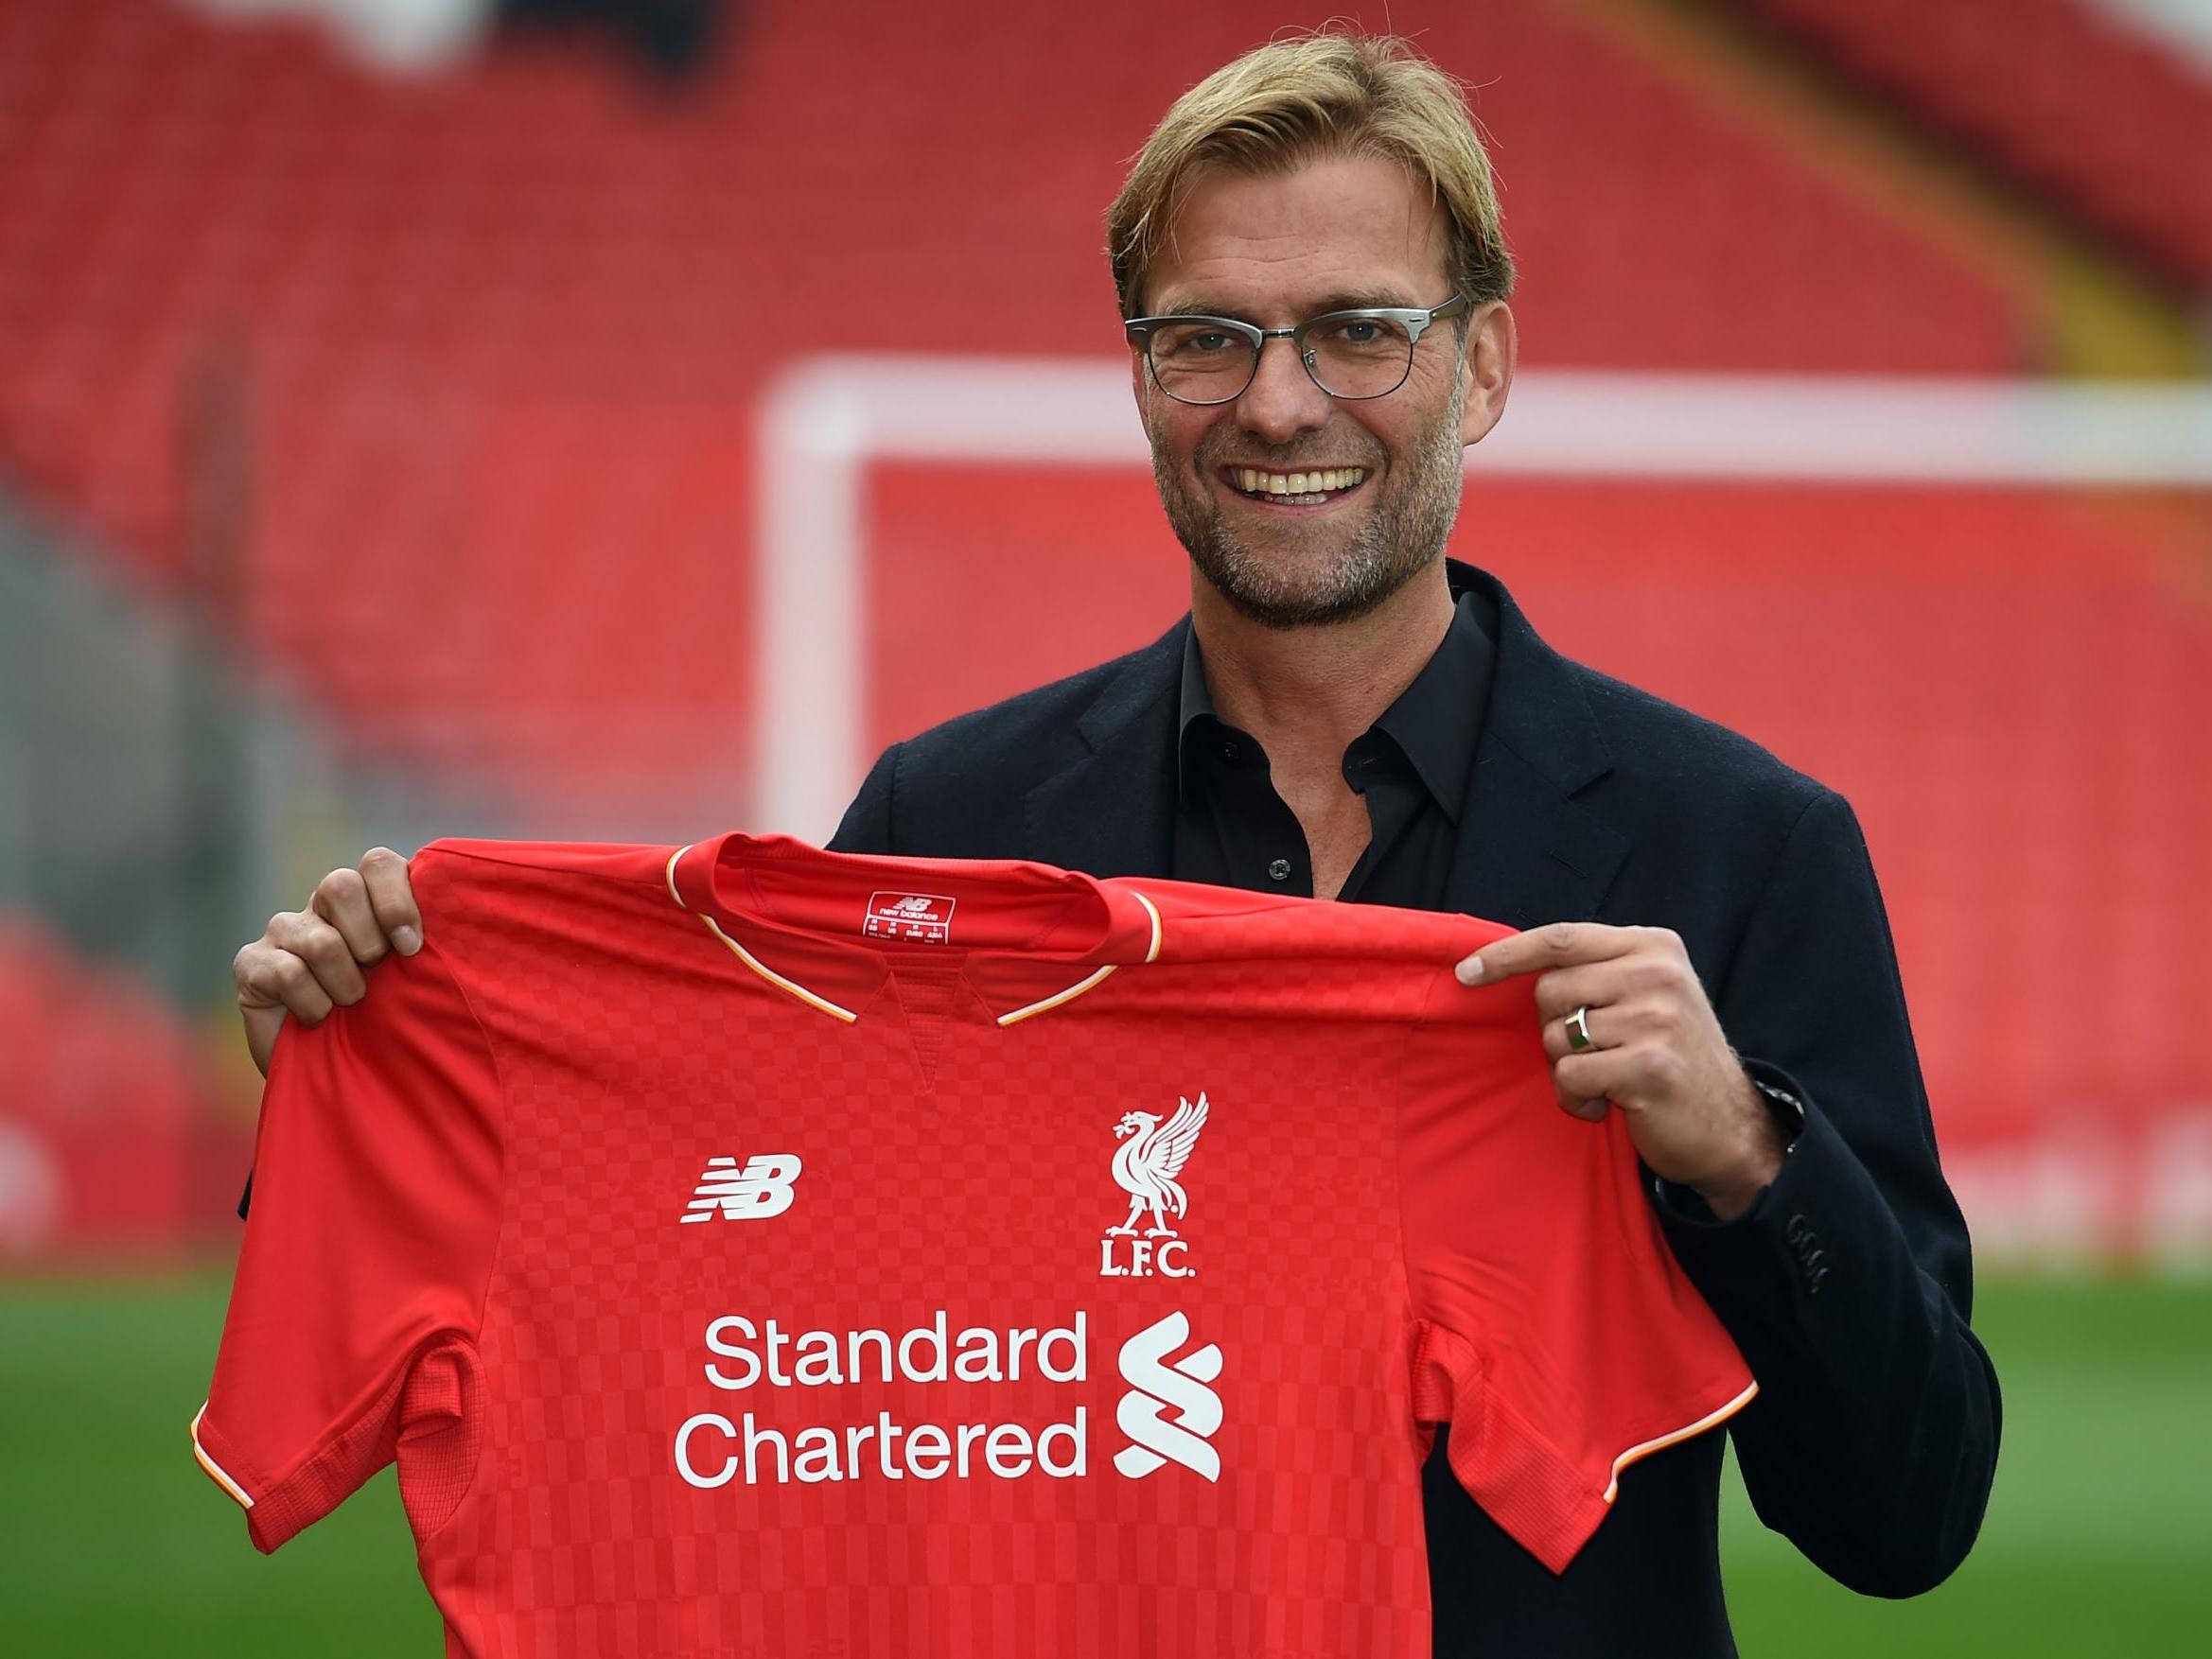 Jurgen Klopp poses after being appointed manager in October 2015